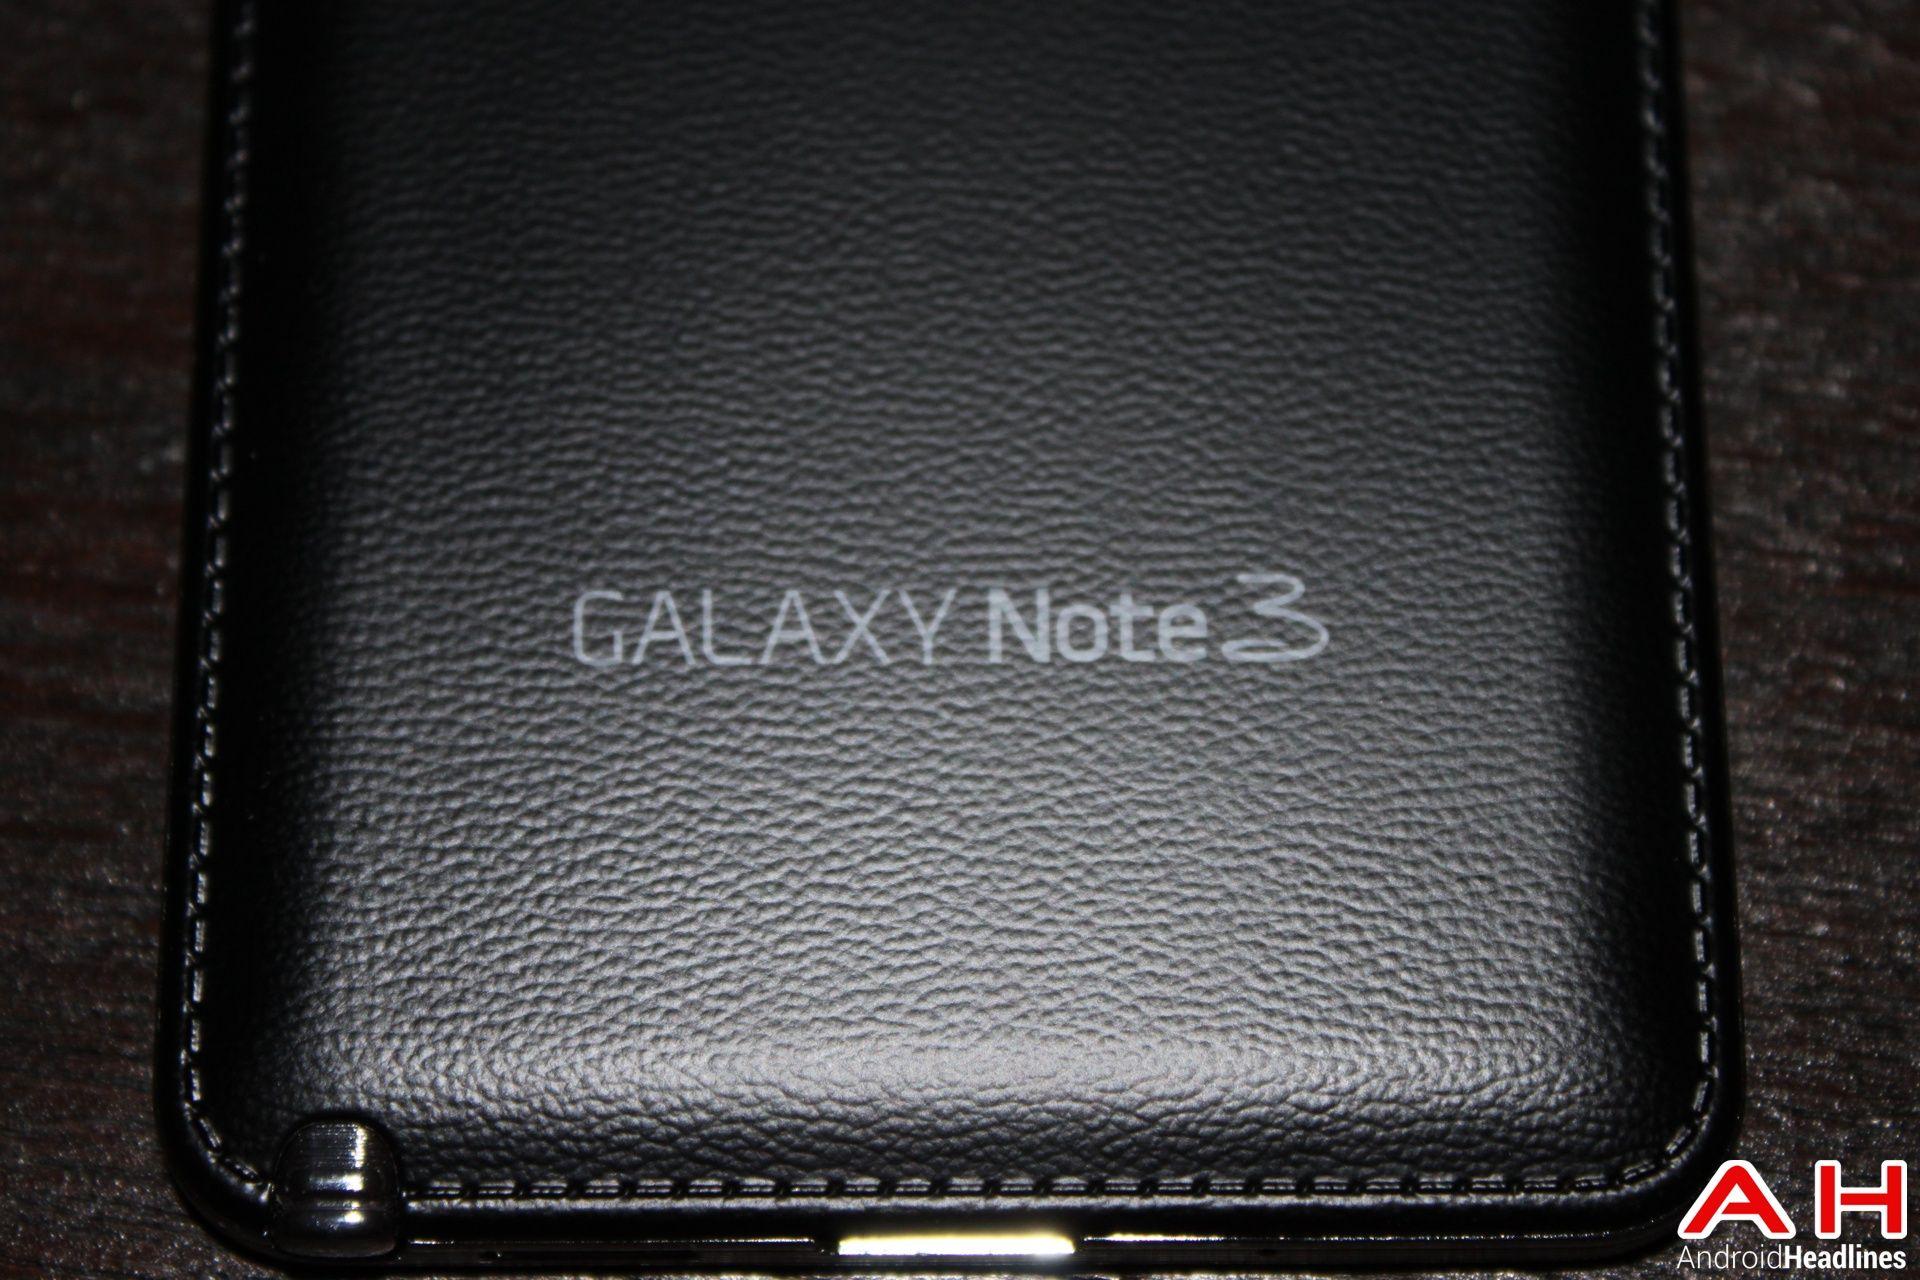 Samsung Galaxy Note 3 Logo - Verizon Sends out Lollipop for its Samsung Galaxy Note 3 | Android ...